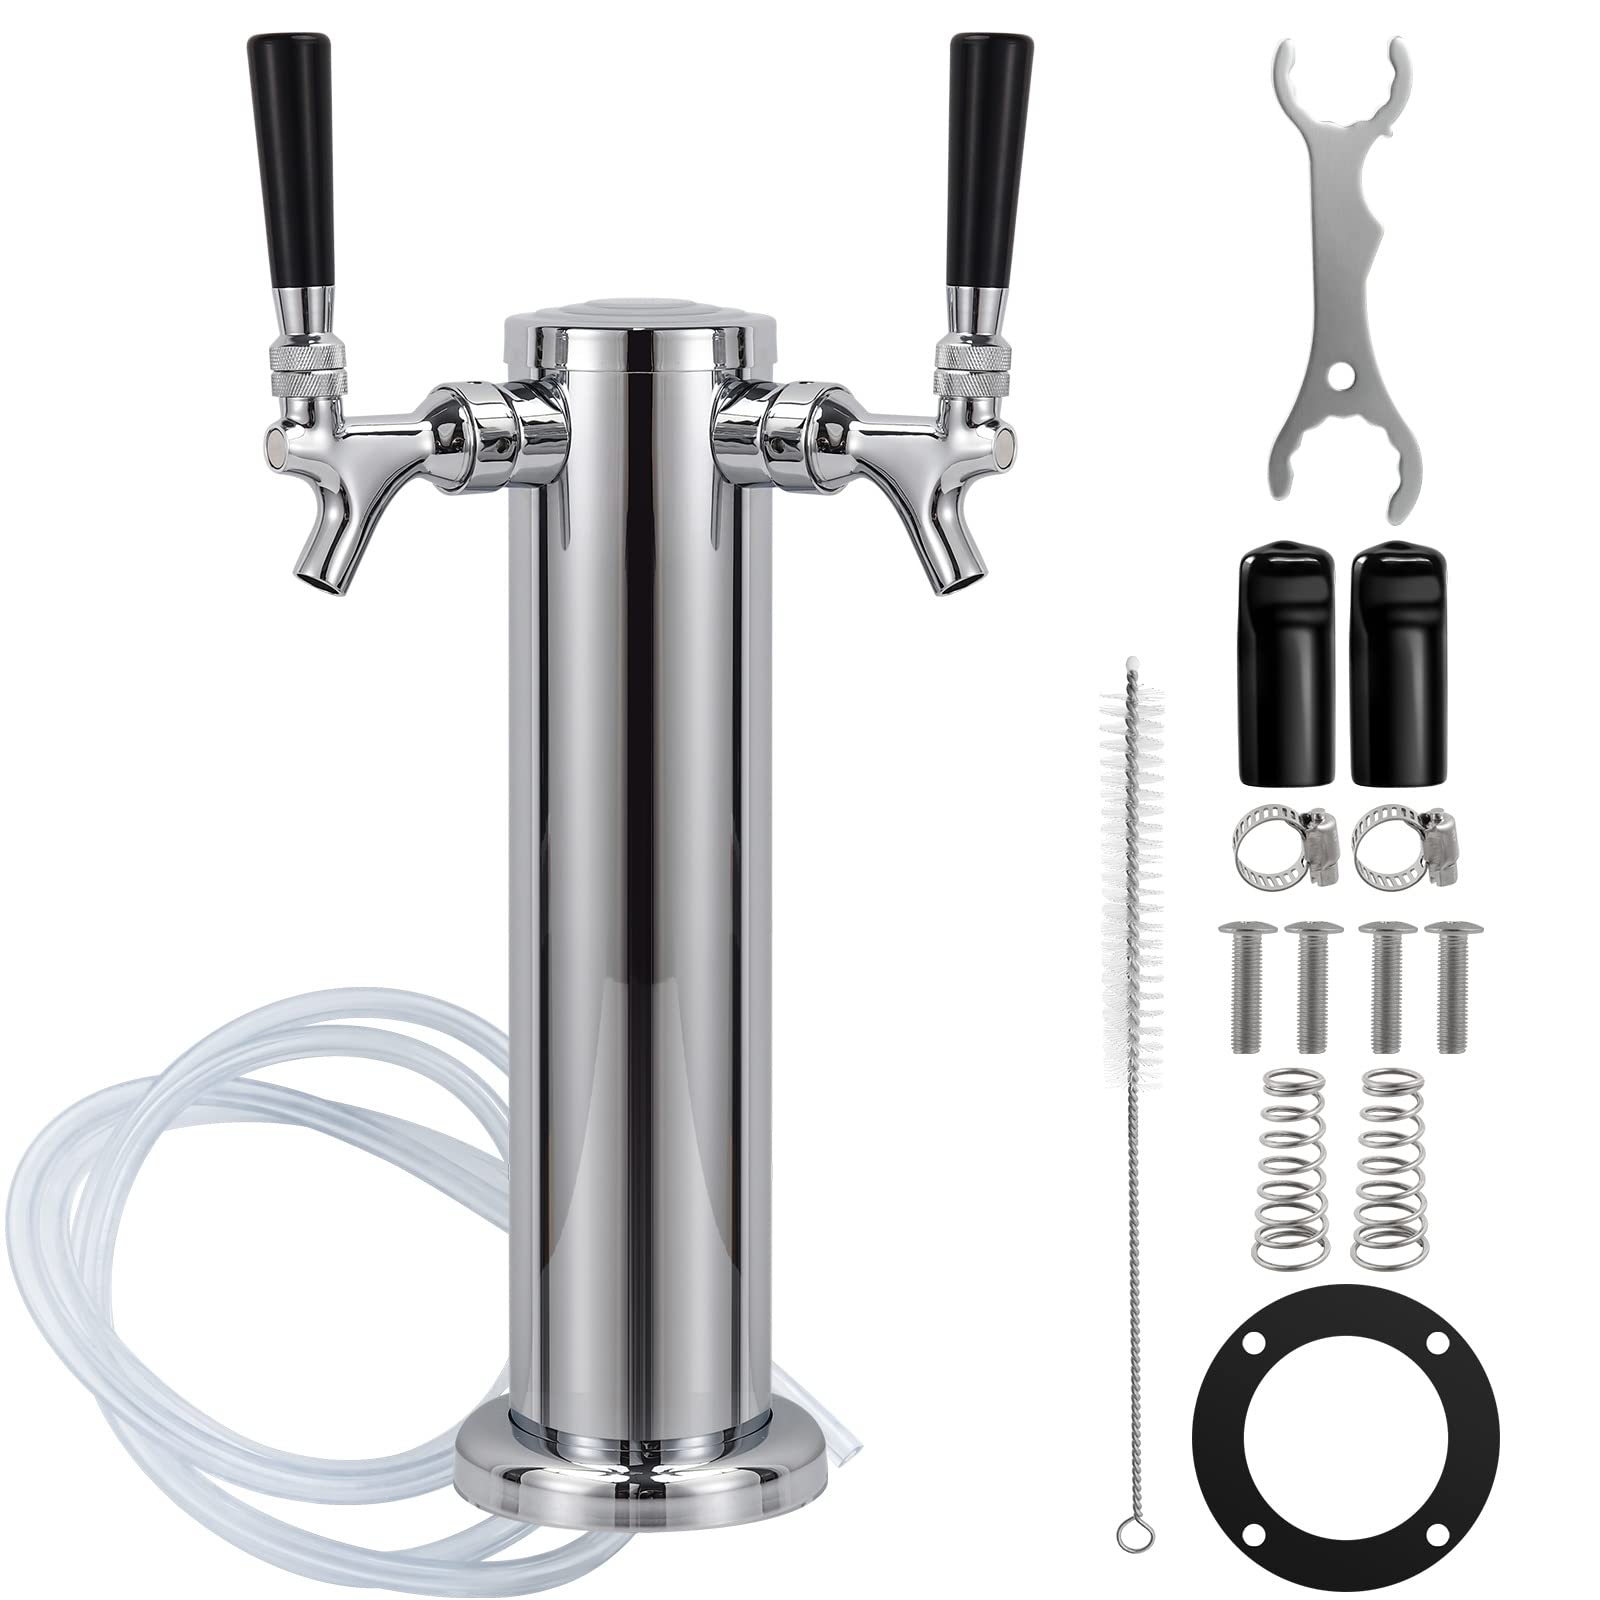 FERRODAY Dual Faucet Beer Tower Double Tap Beer Tower Beer Facet Dispenser Double Beer Tap Stainless Steel Tower Brass Faucet Stainless Core Pre-assembled Lines Keg Tower 3" Kegerator Tower Homebrew Dual Tap Kegerator Tower